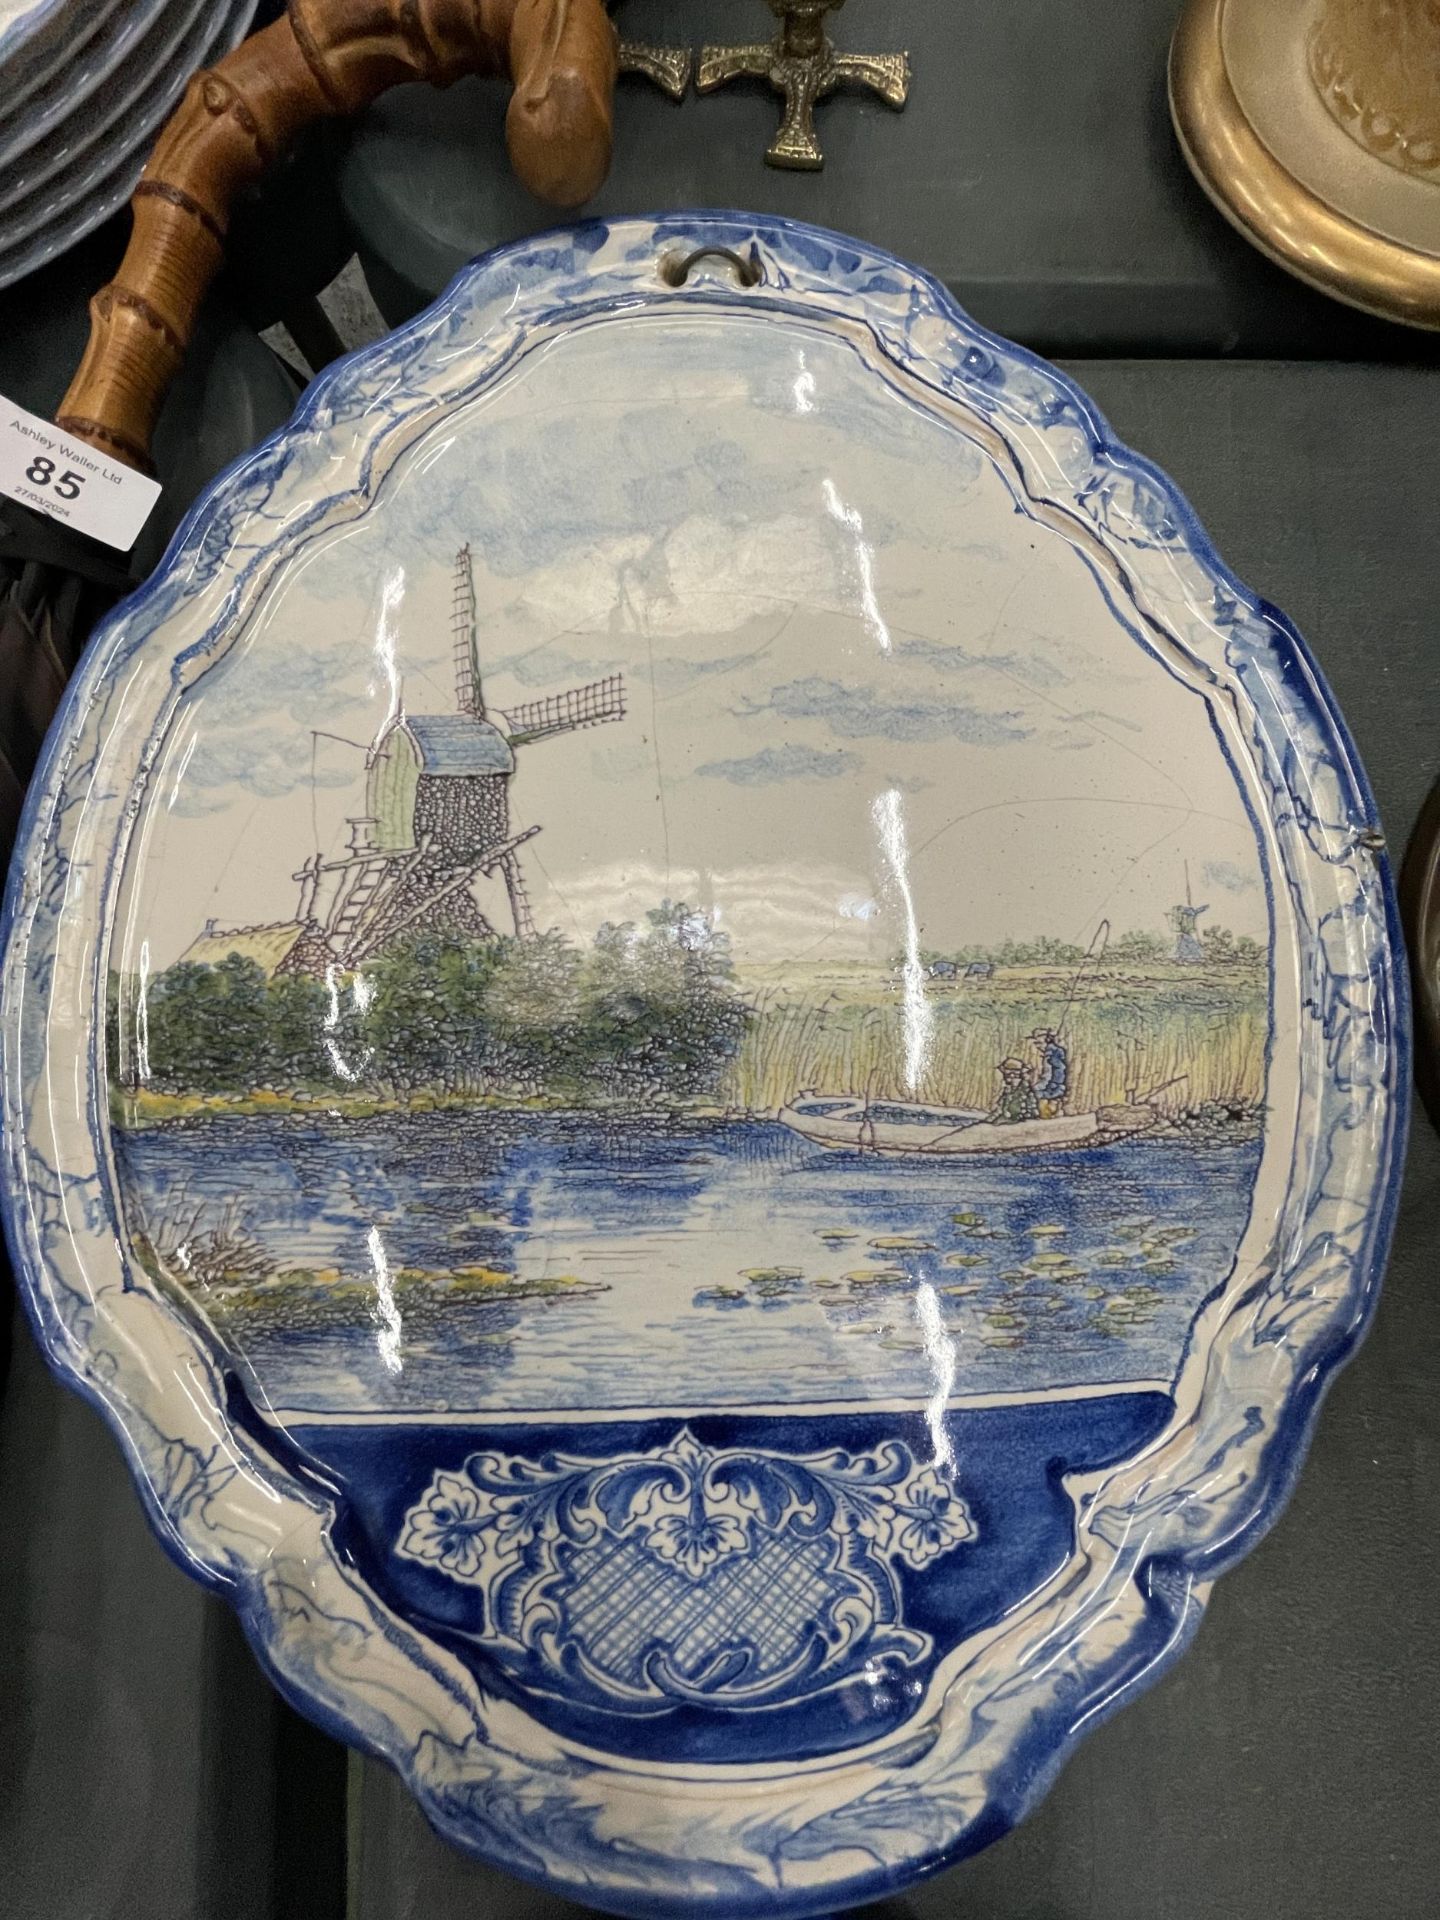 TWO LARGE DELFT WALL PLAQUES WITH WINDMILL SCENES - Image 3 of 4